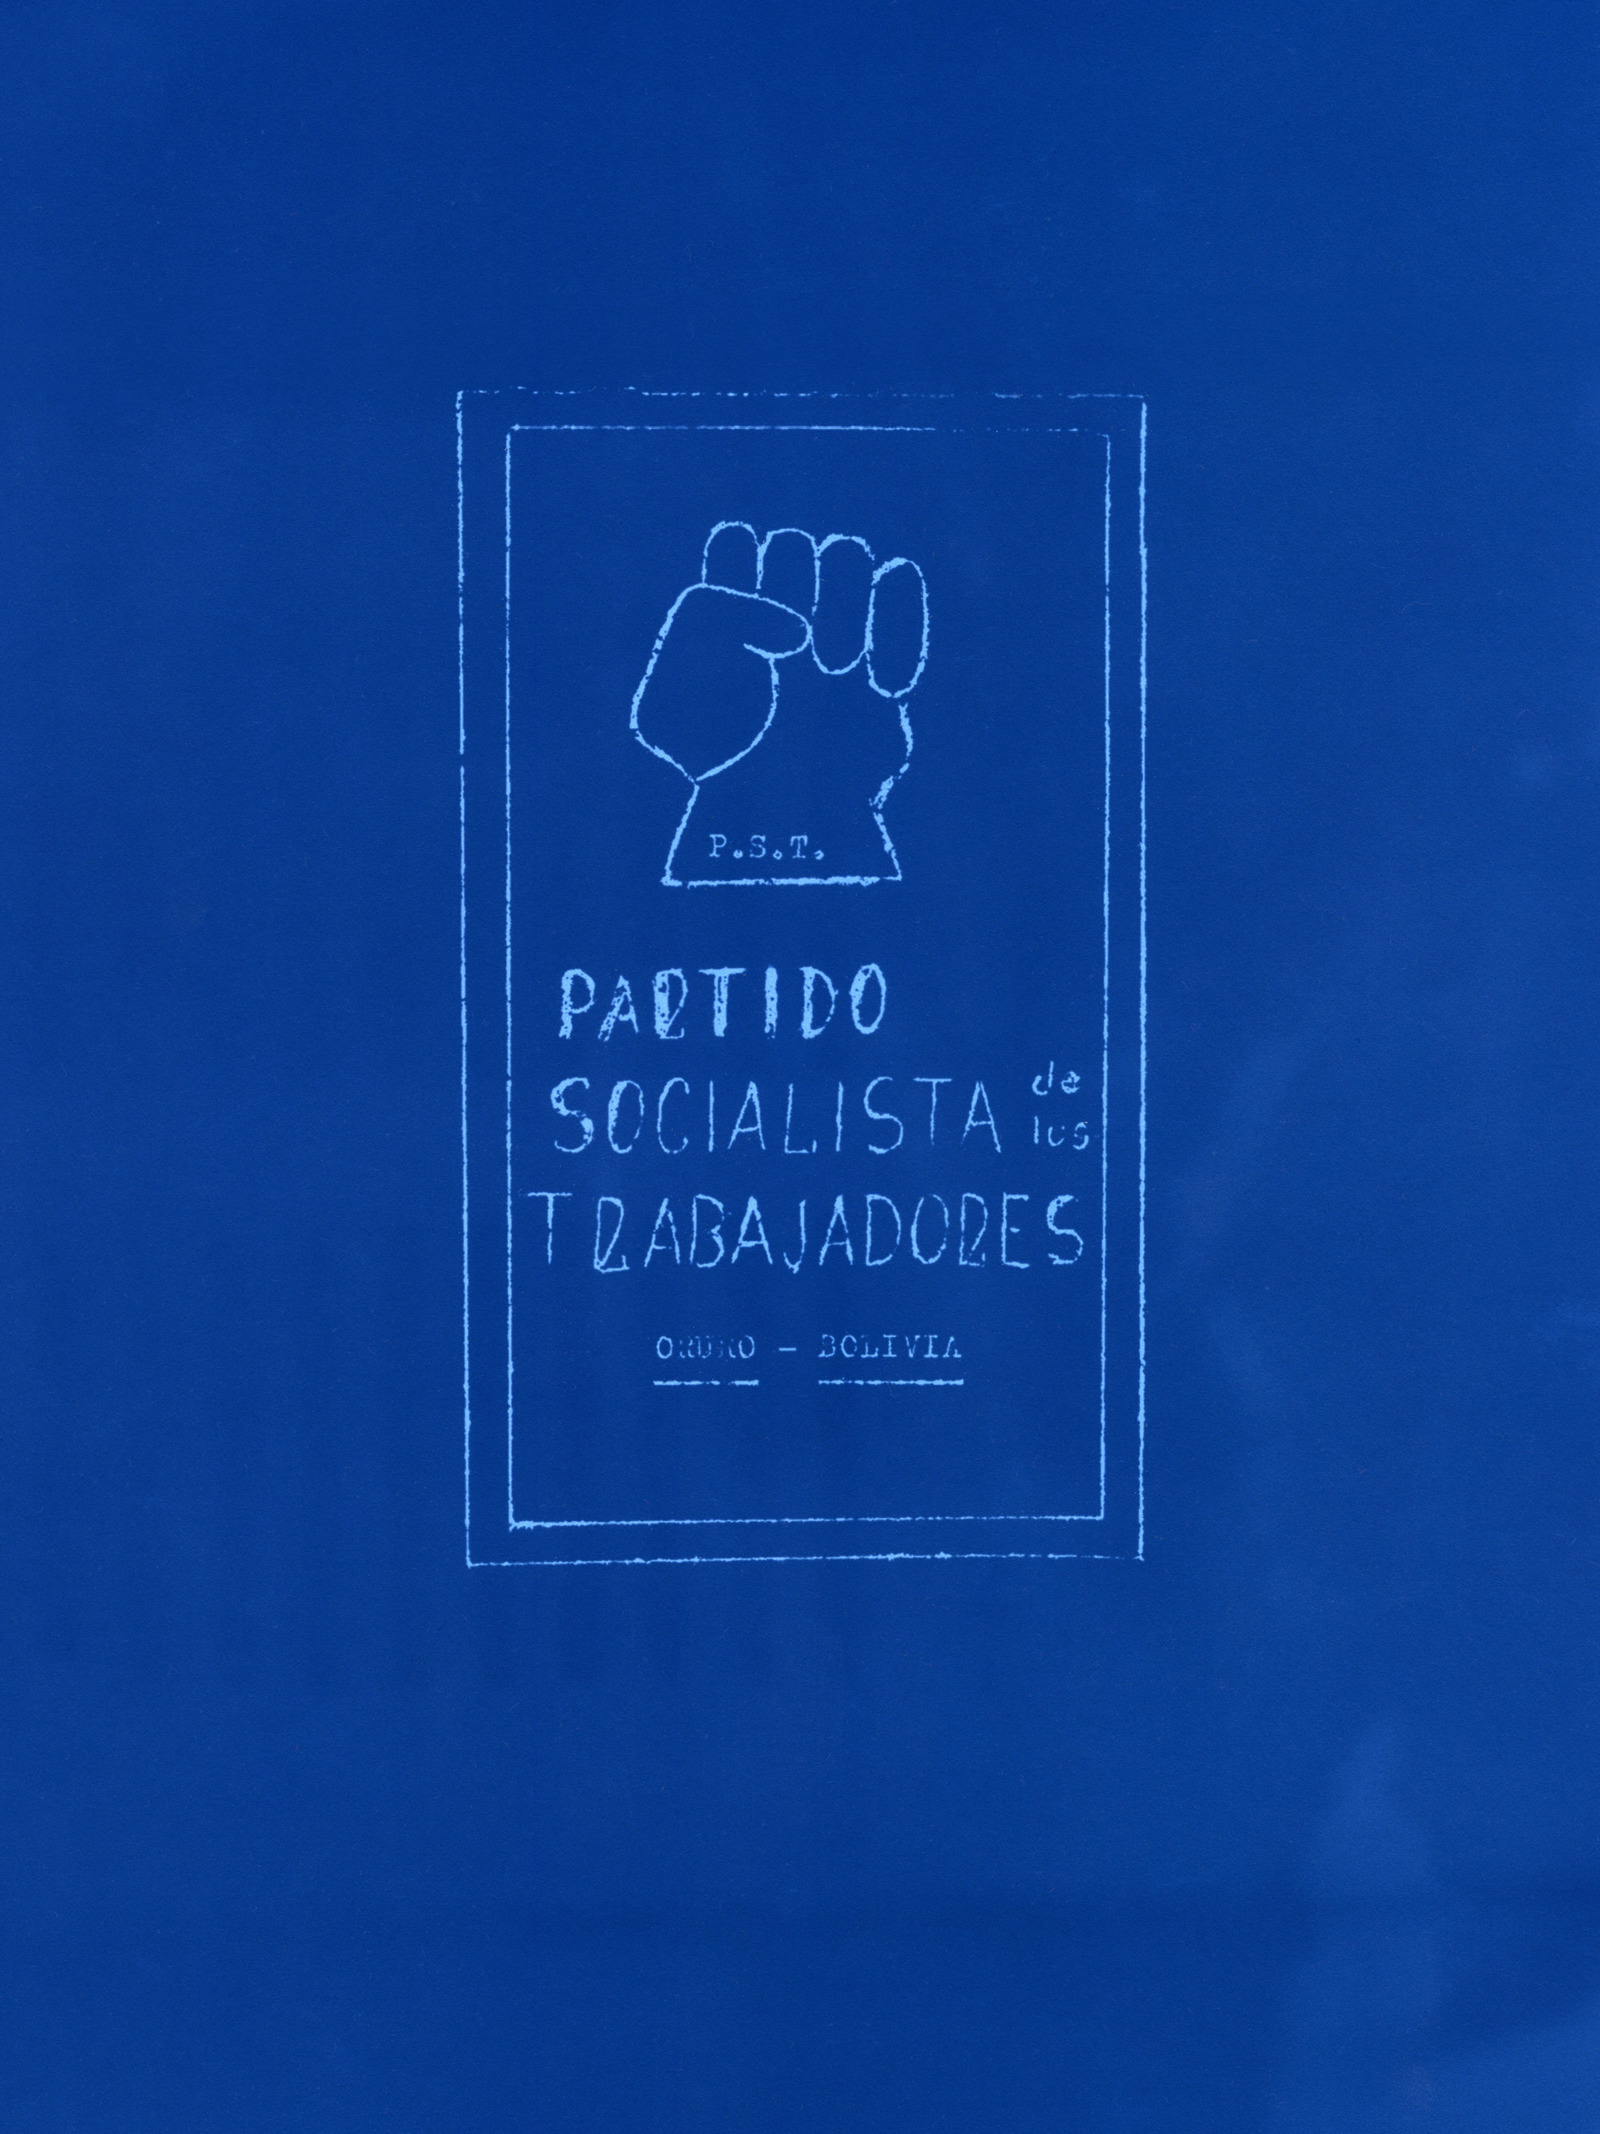 A cyanotype of a hand drawn socialist party poster.